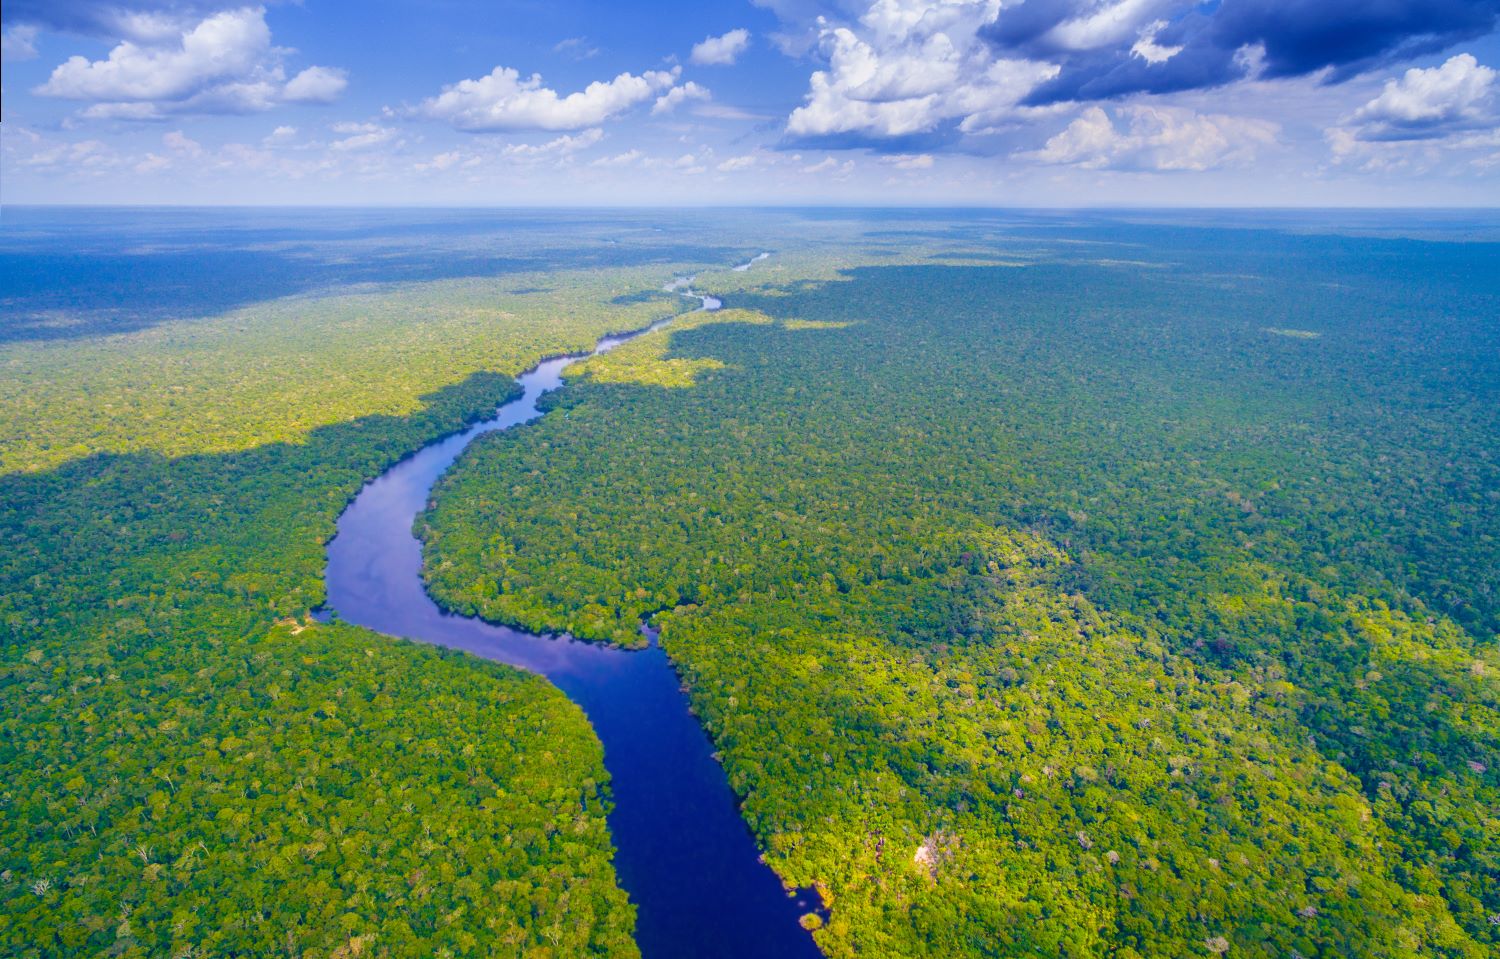 The Amazon is losing its ability to "rebound" from destruction